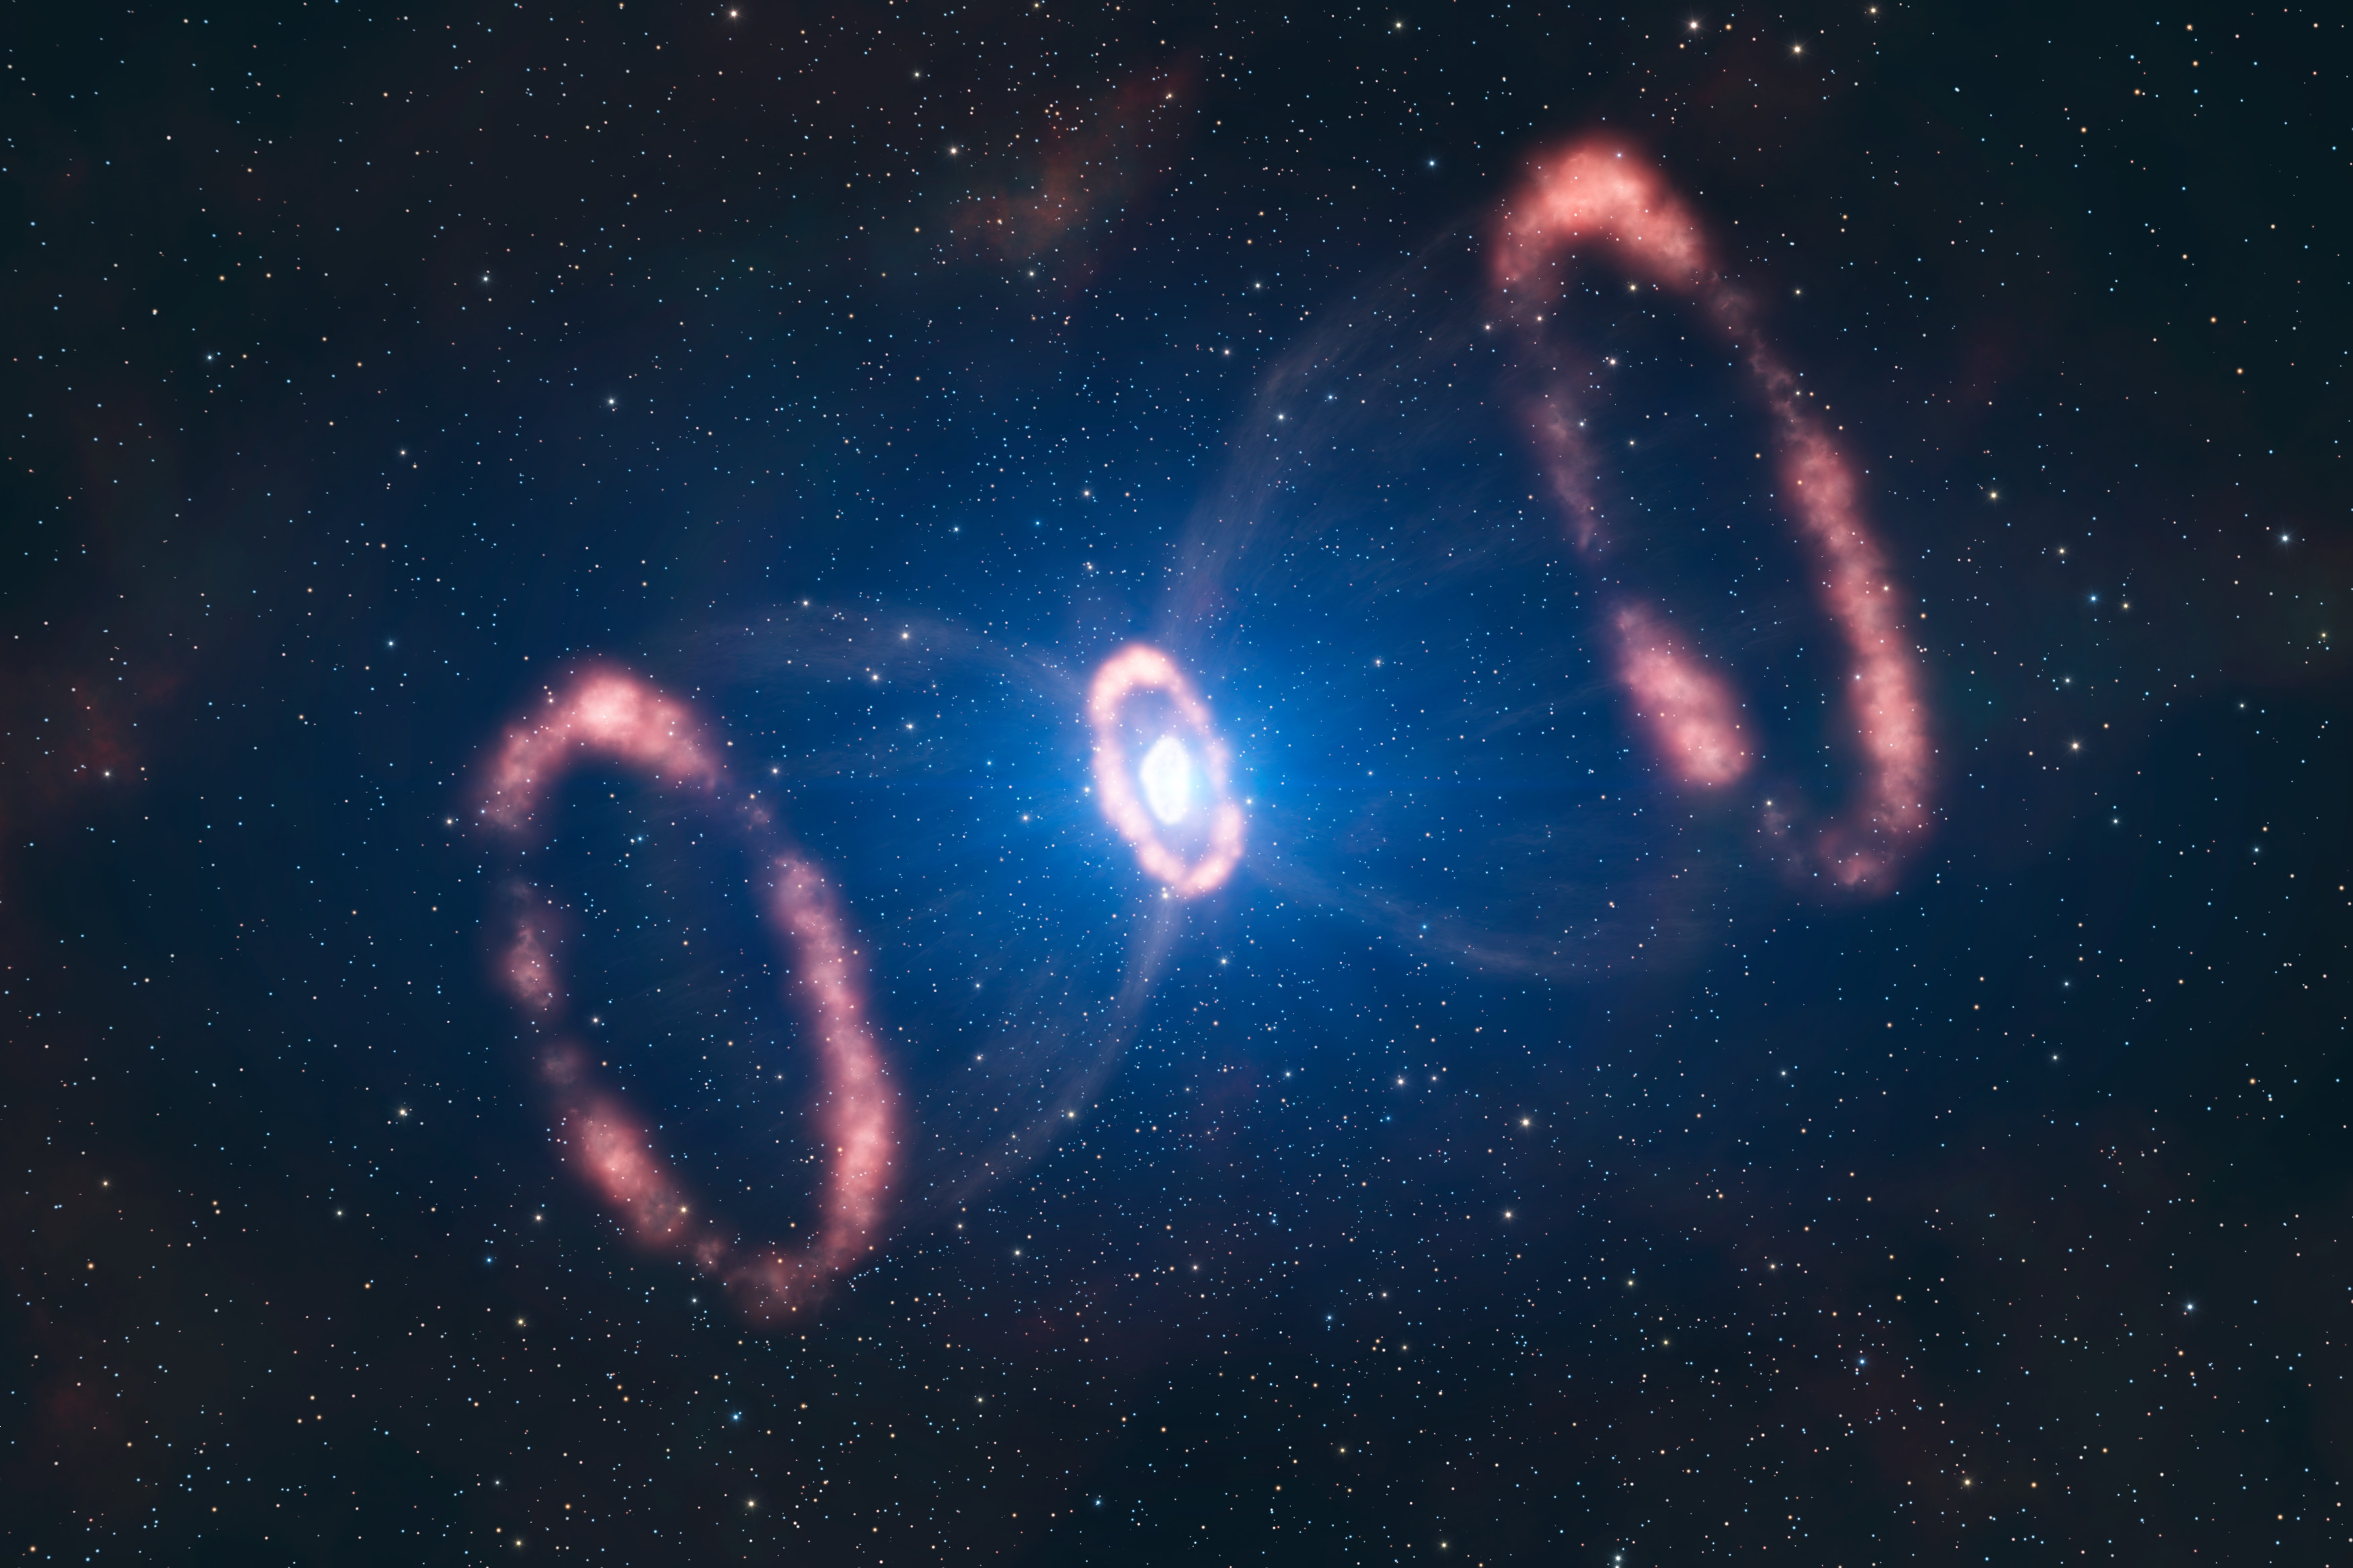 Remnants of Sn 1987a